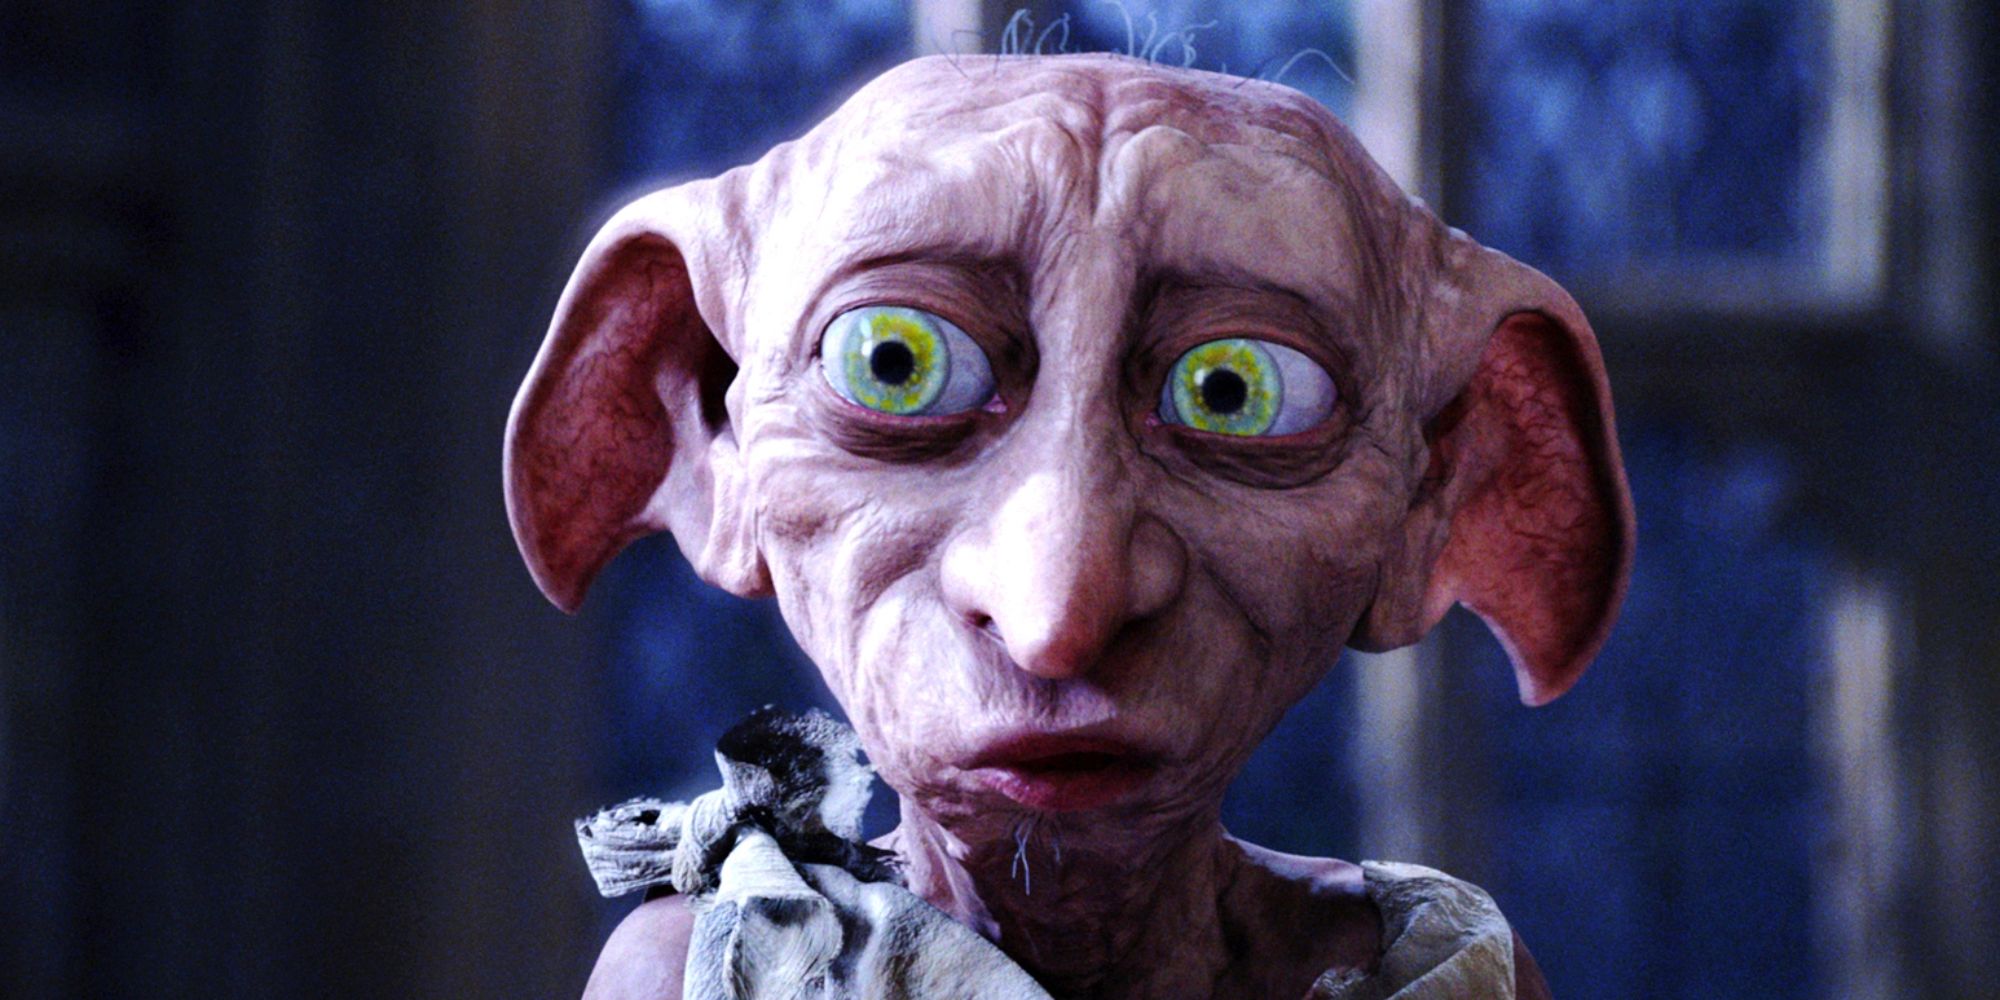 A closeup of Dobby in the Harry Potter movie franchise